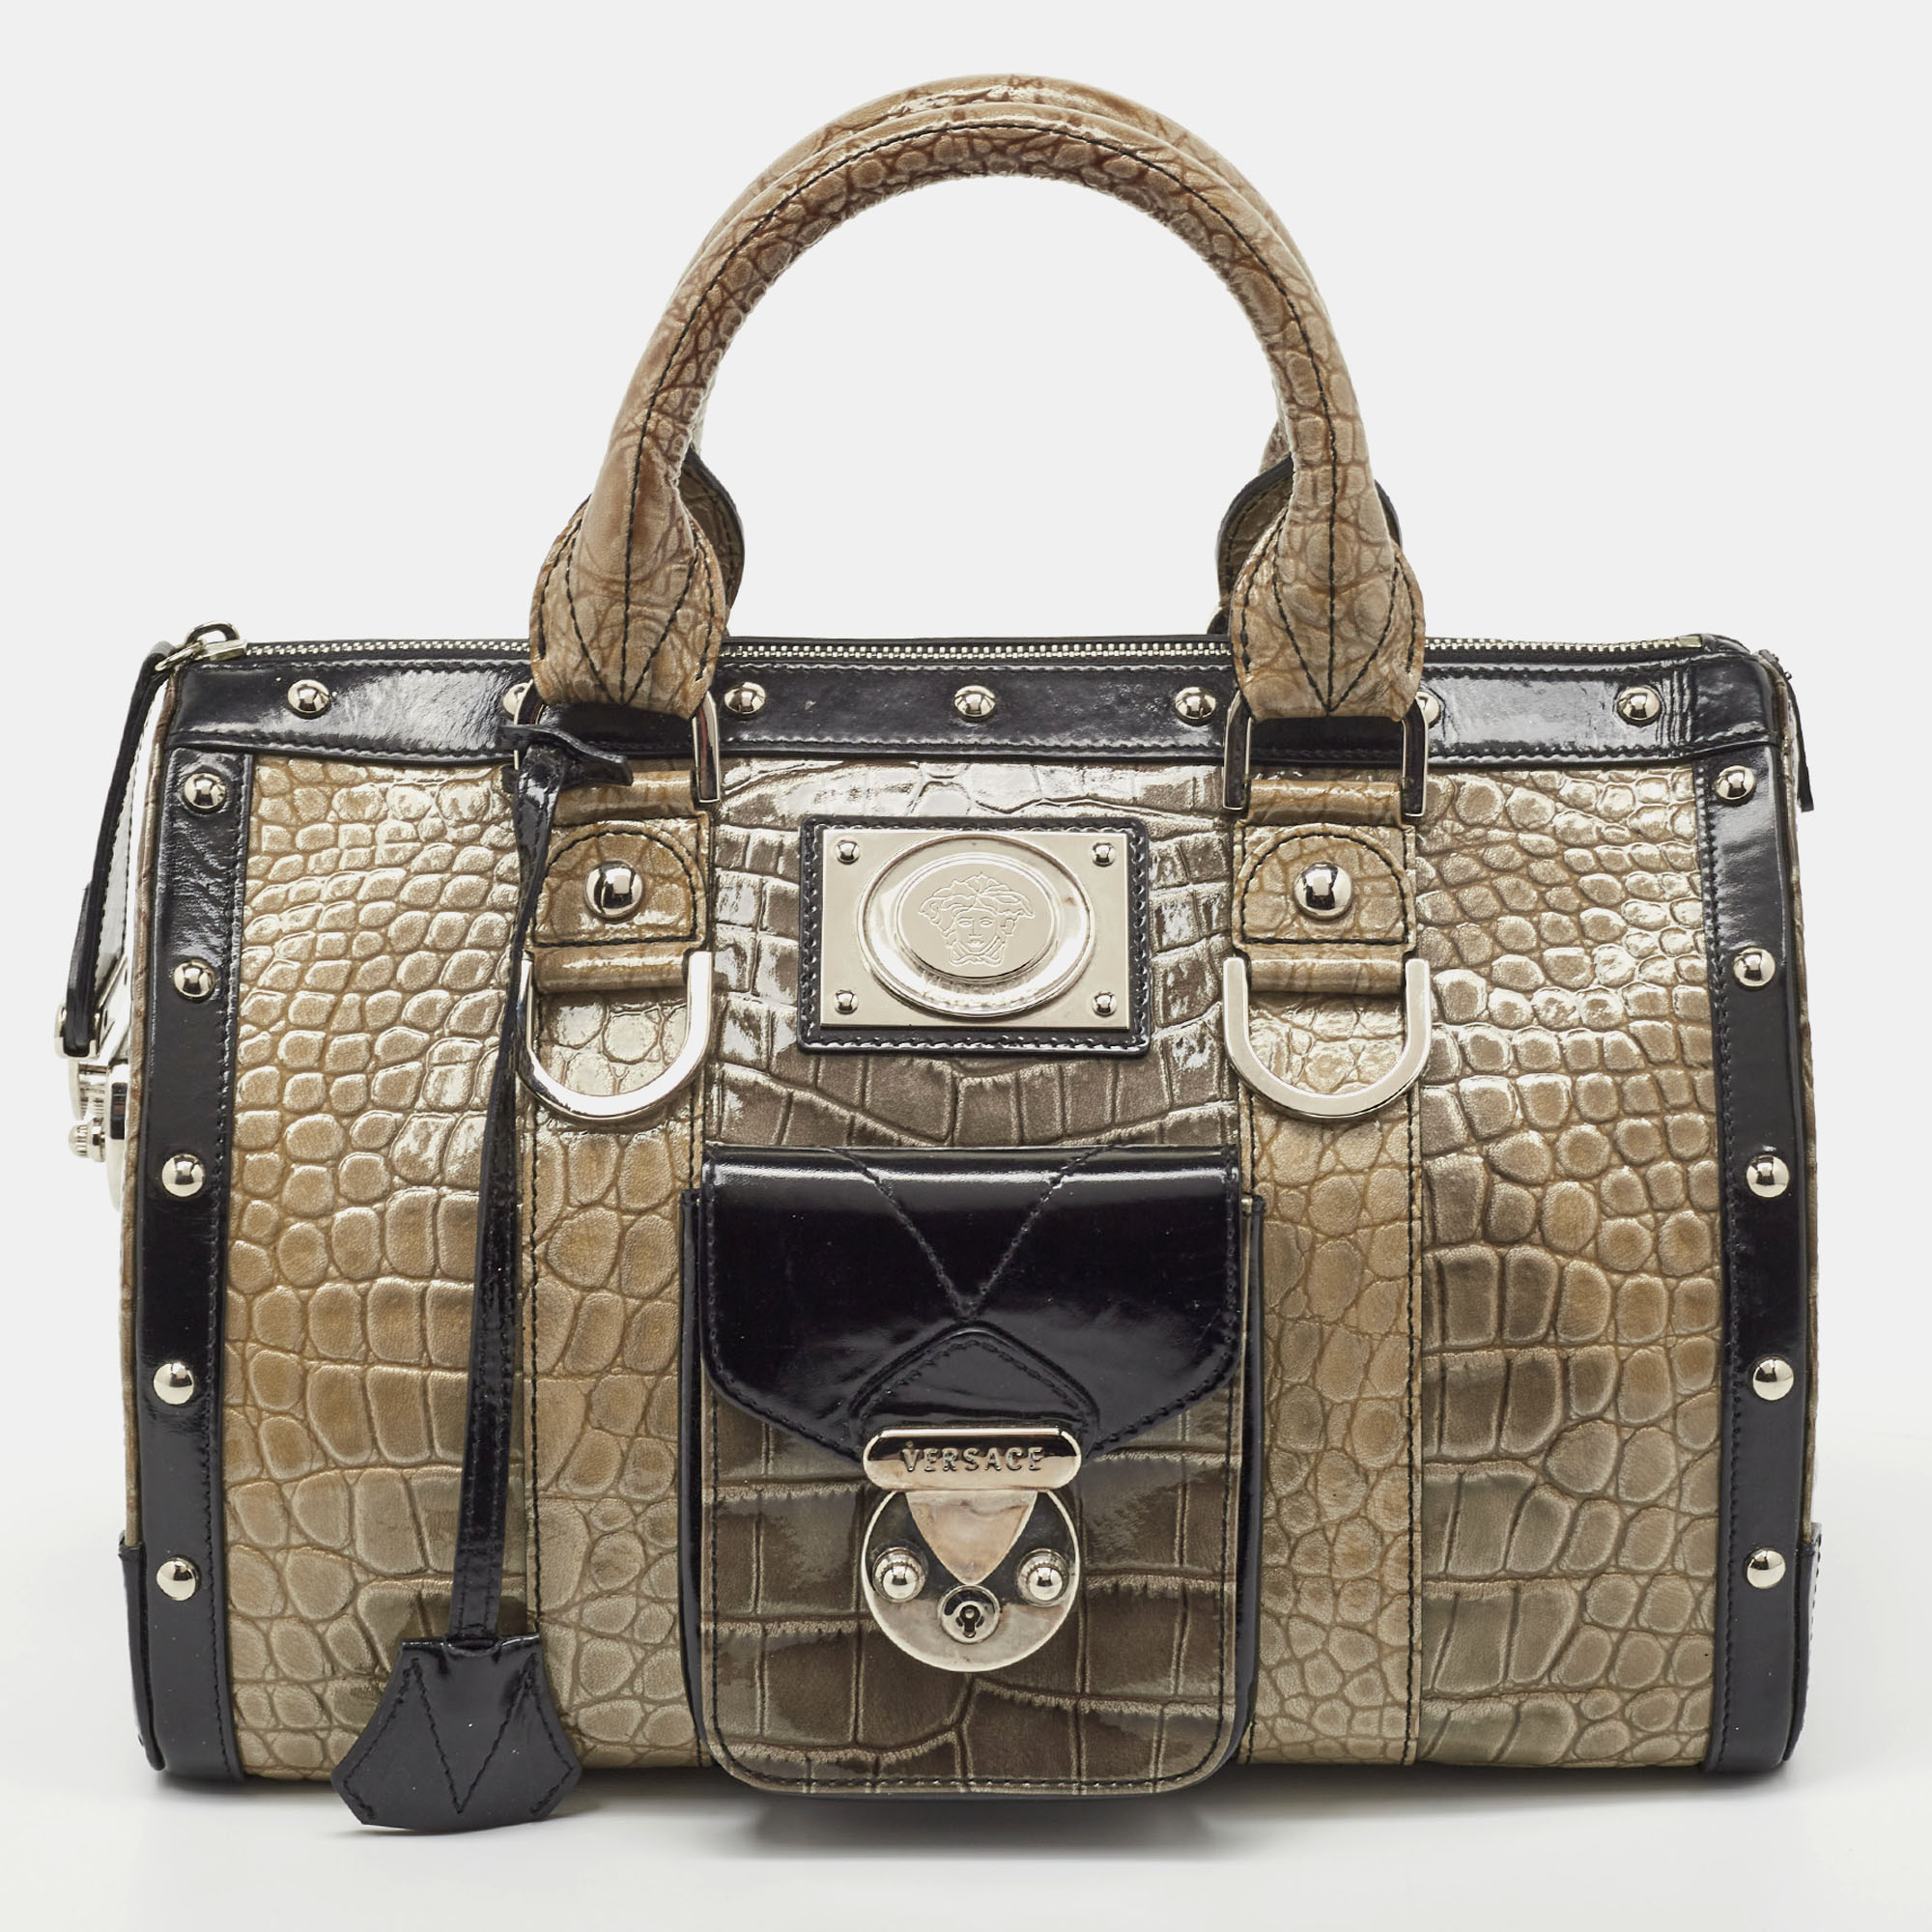 

Versace Black/Beige Croc Embossed and Patent Leather Studded Madonna Satchel